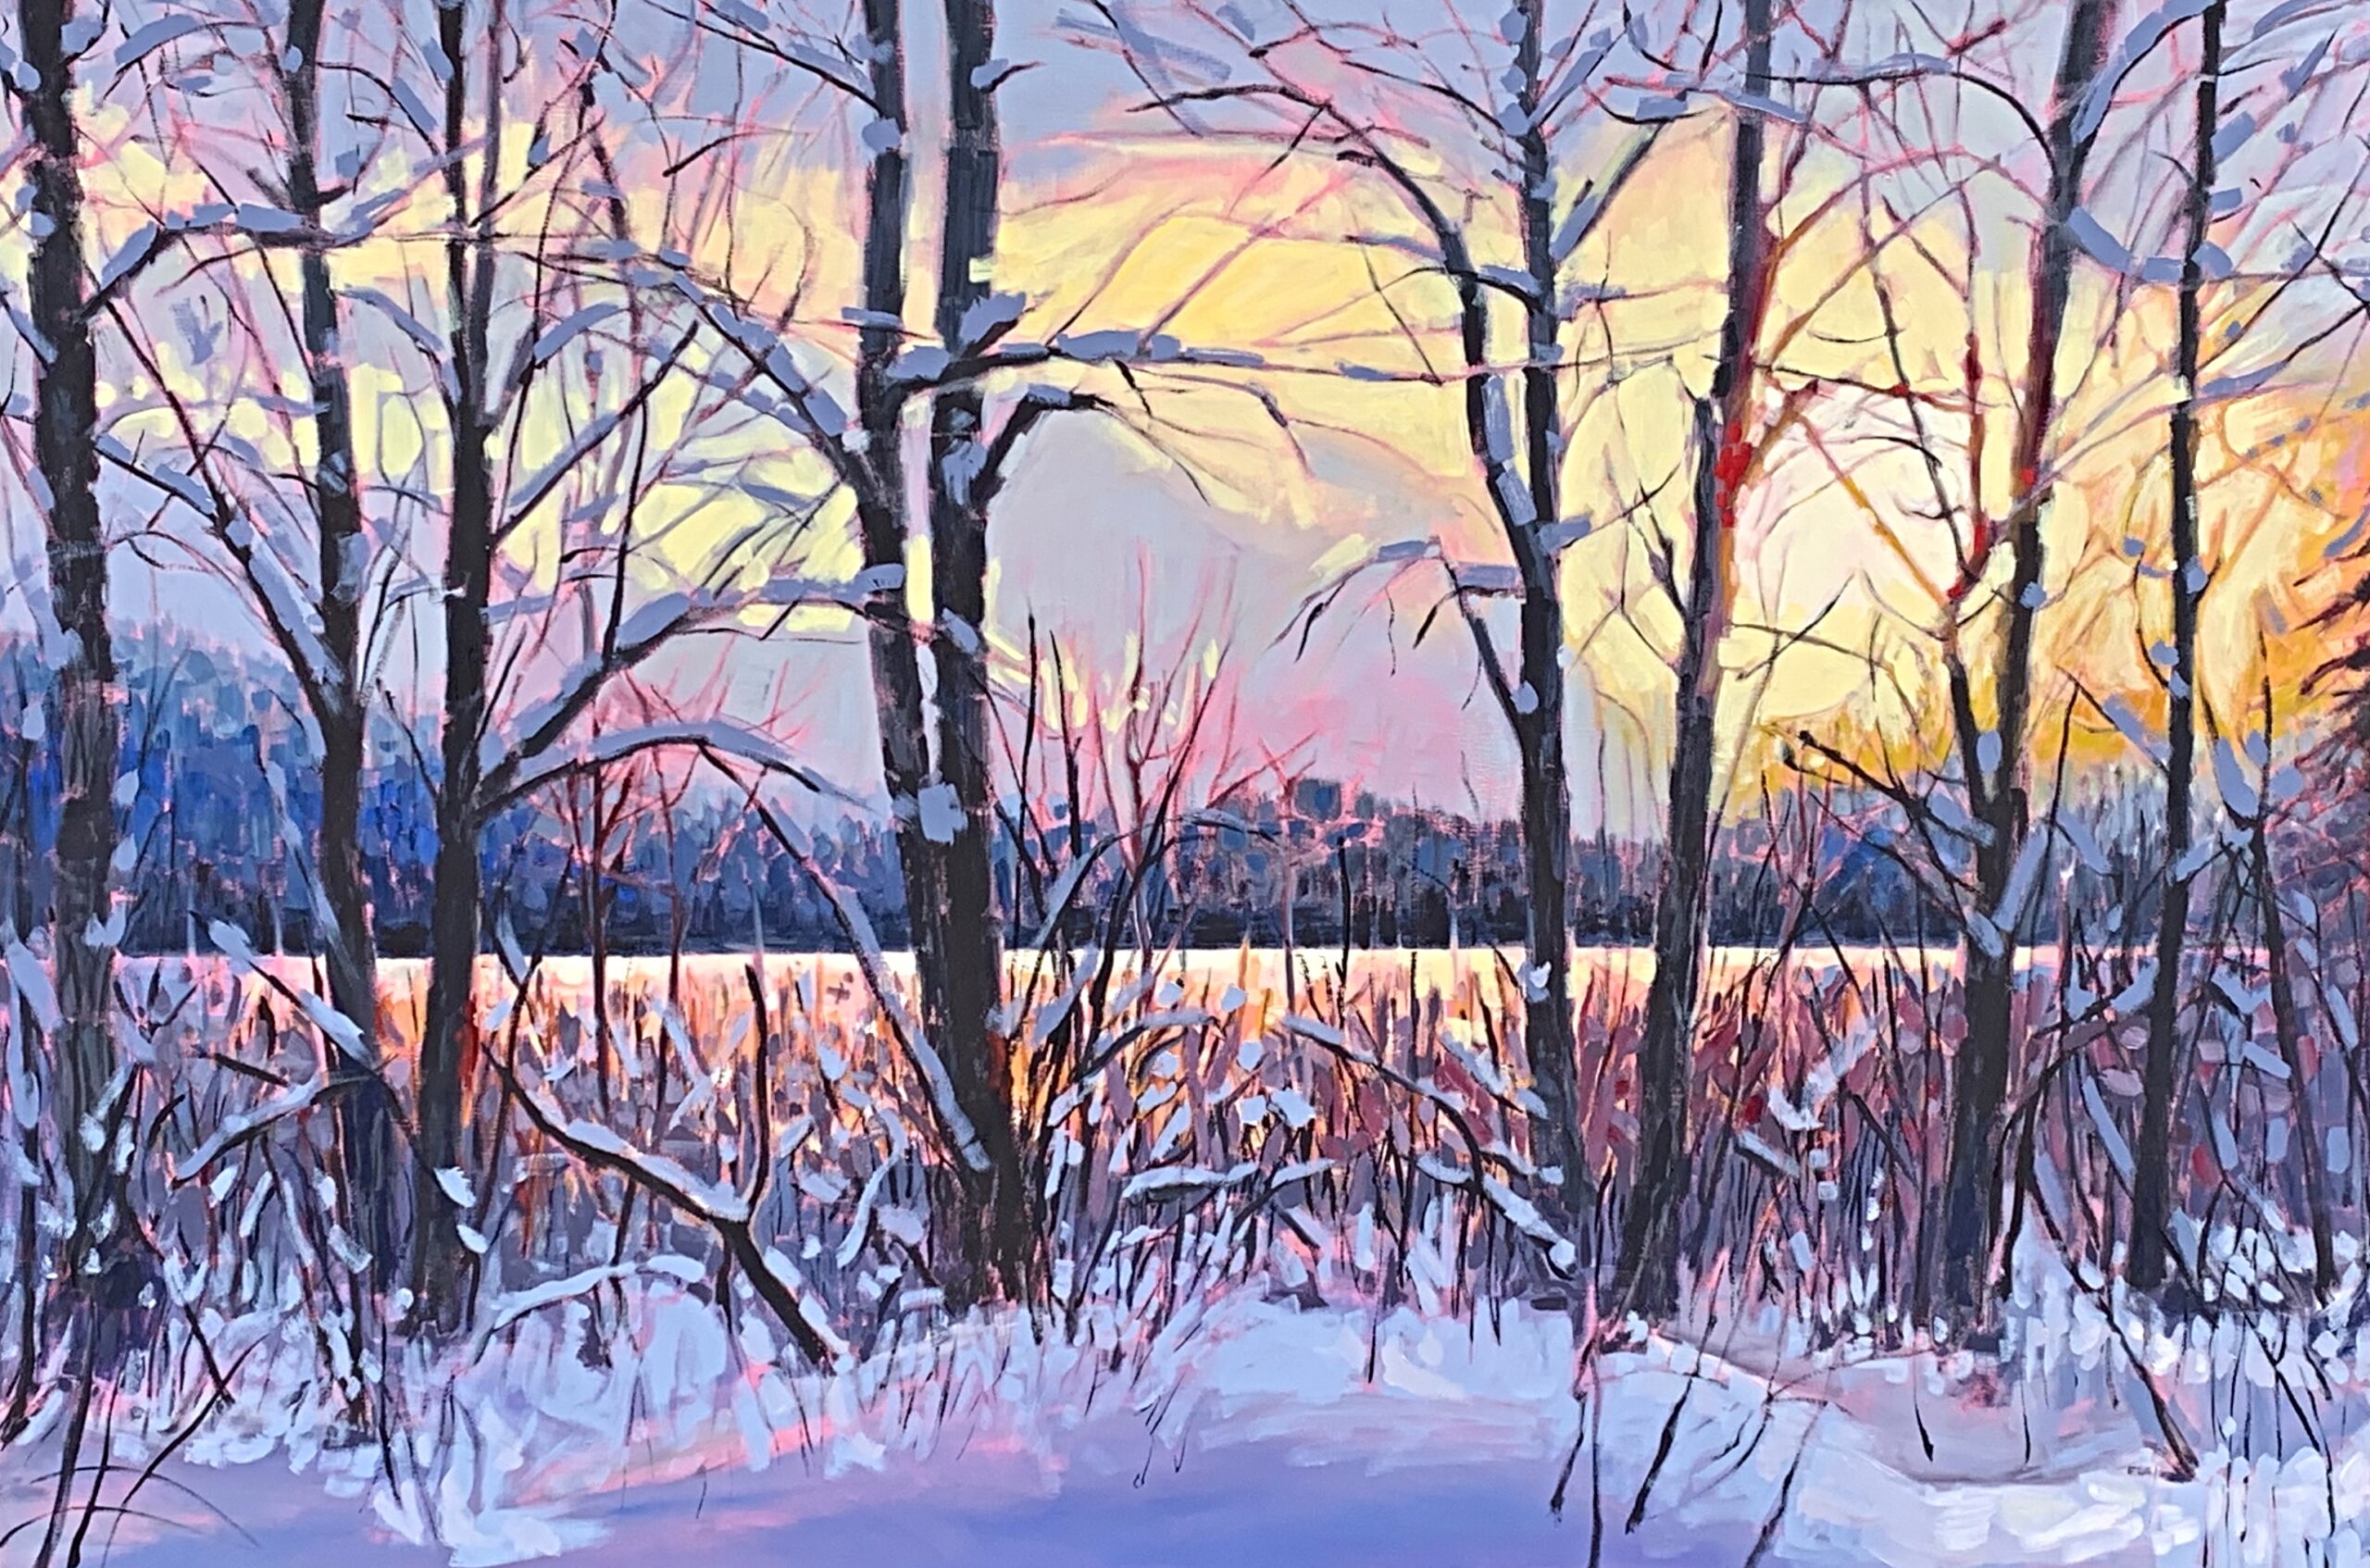 Oil painting of a winter sunrise of a frozen BC mountain lake through the trees with pink and purple sky by Stephanie Taylor.